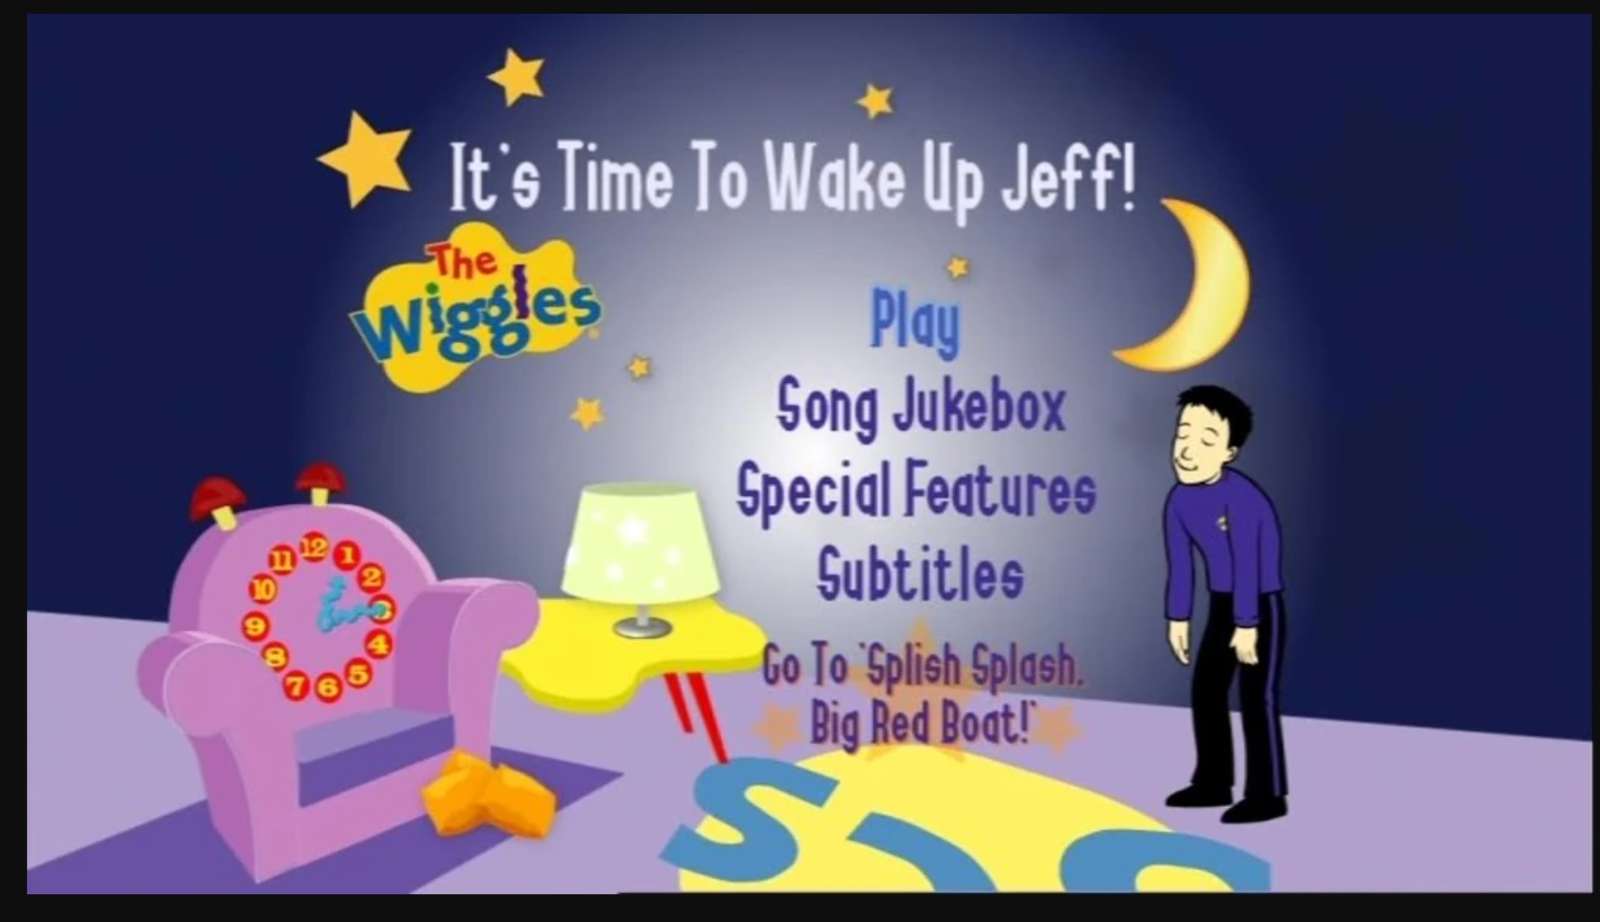 Its Time To Wake Up Jeff DVD Menu online puzzle